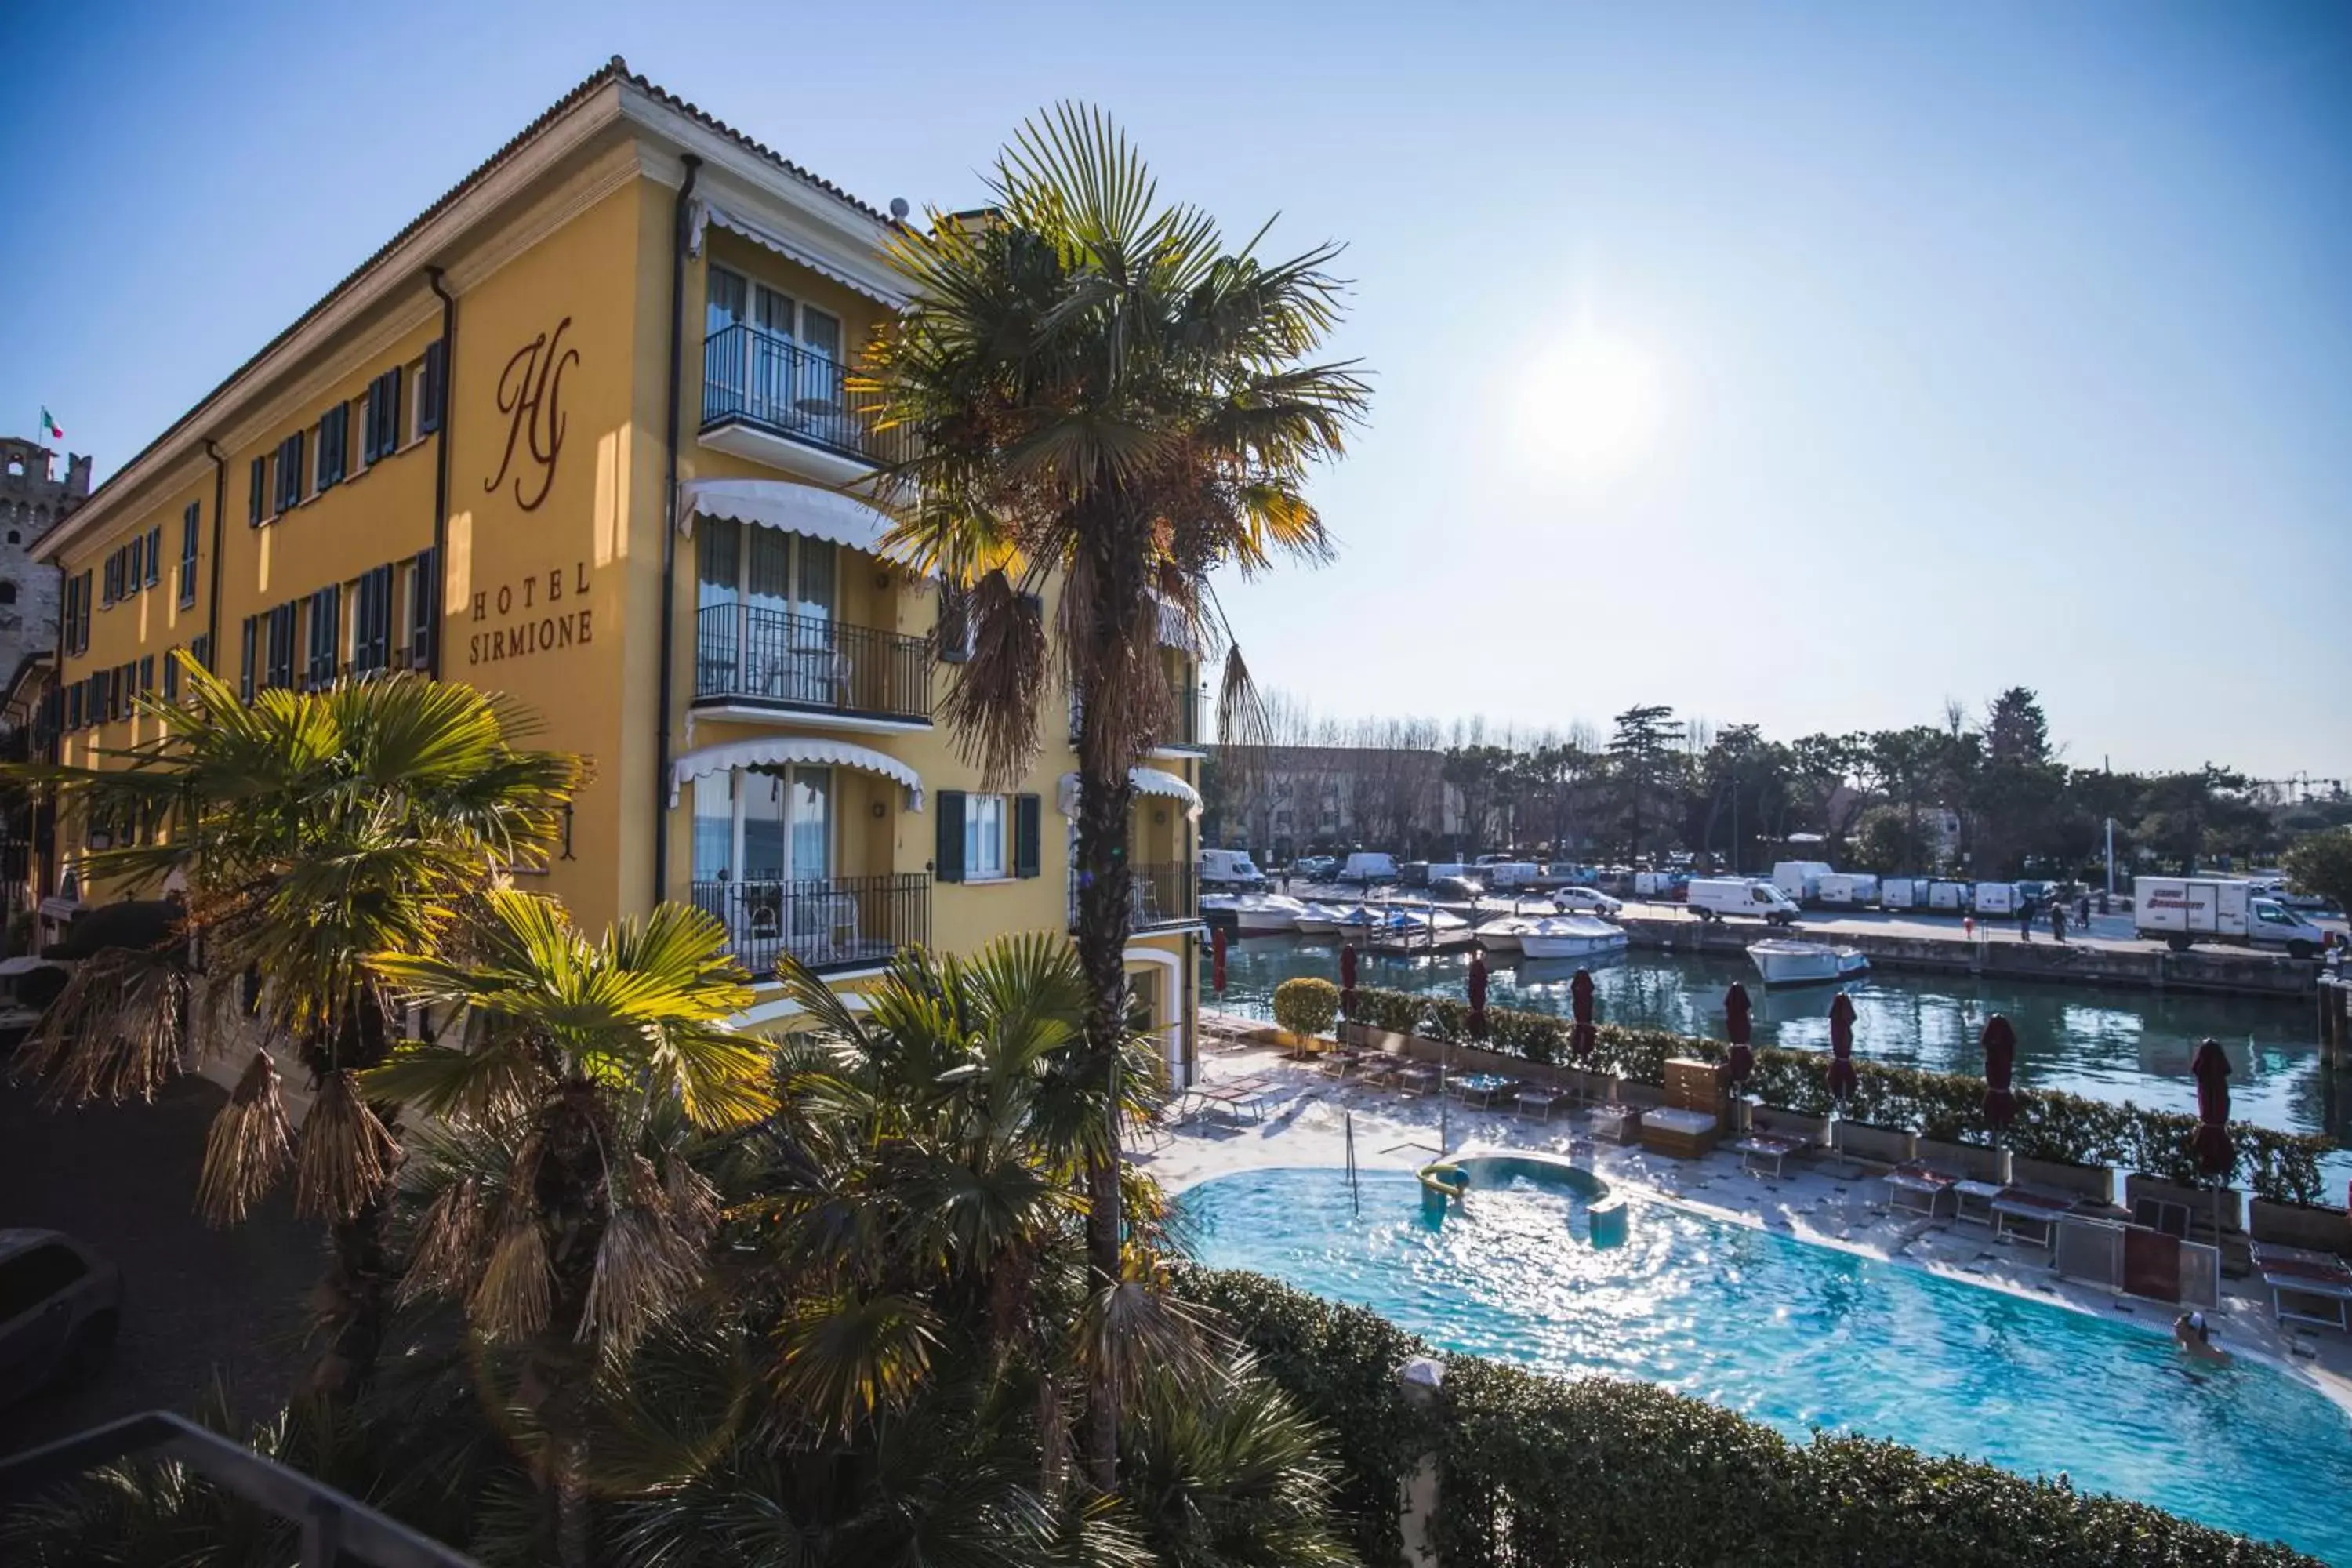 Property building in Hotel Sirmione